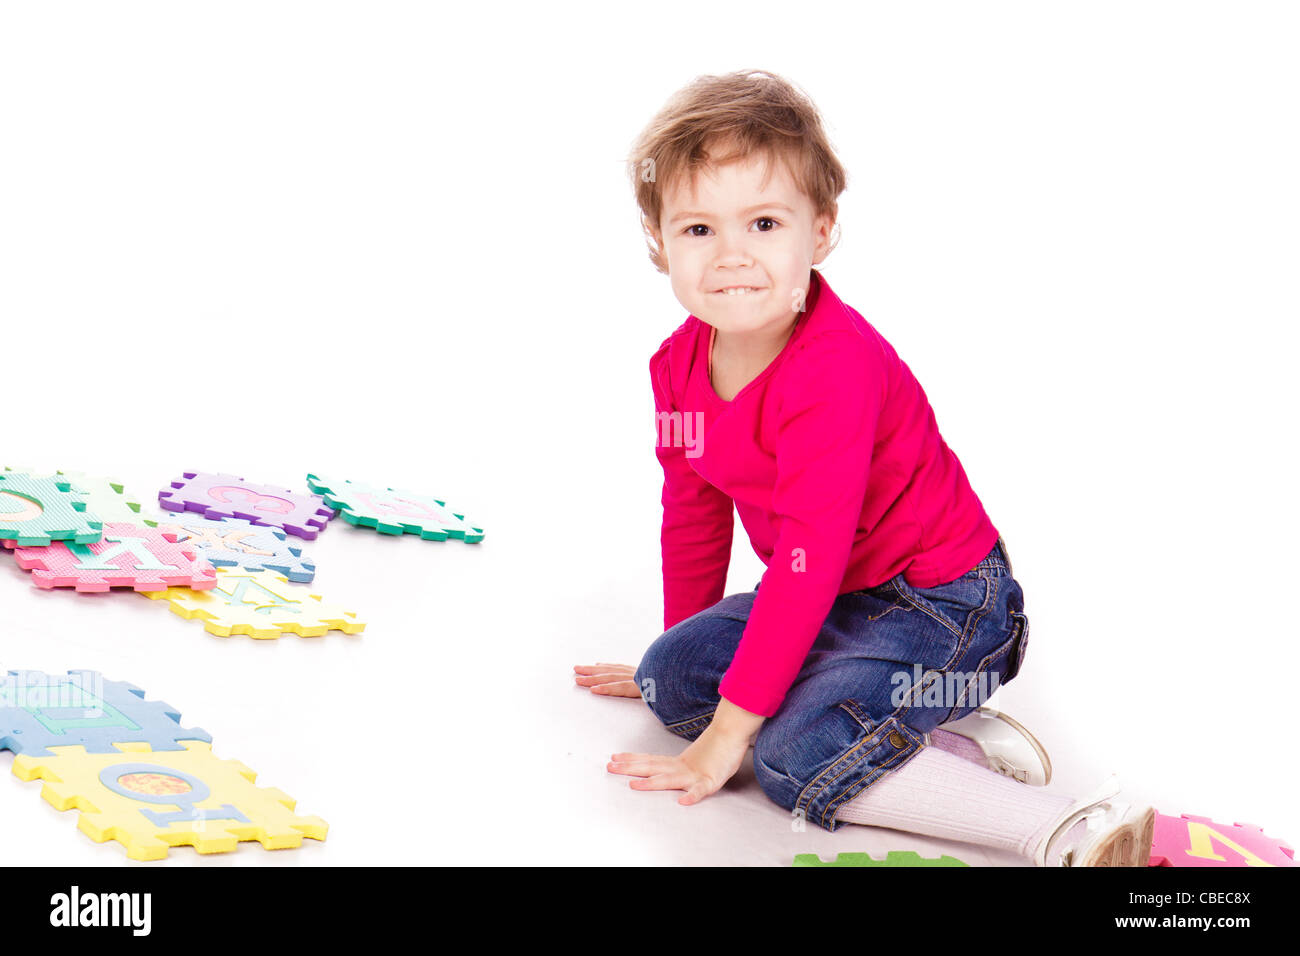 Little cute girl solving alphabet puzzle over white background Stock Photo